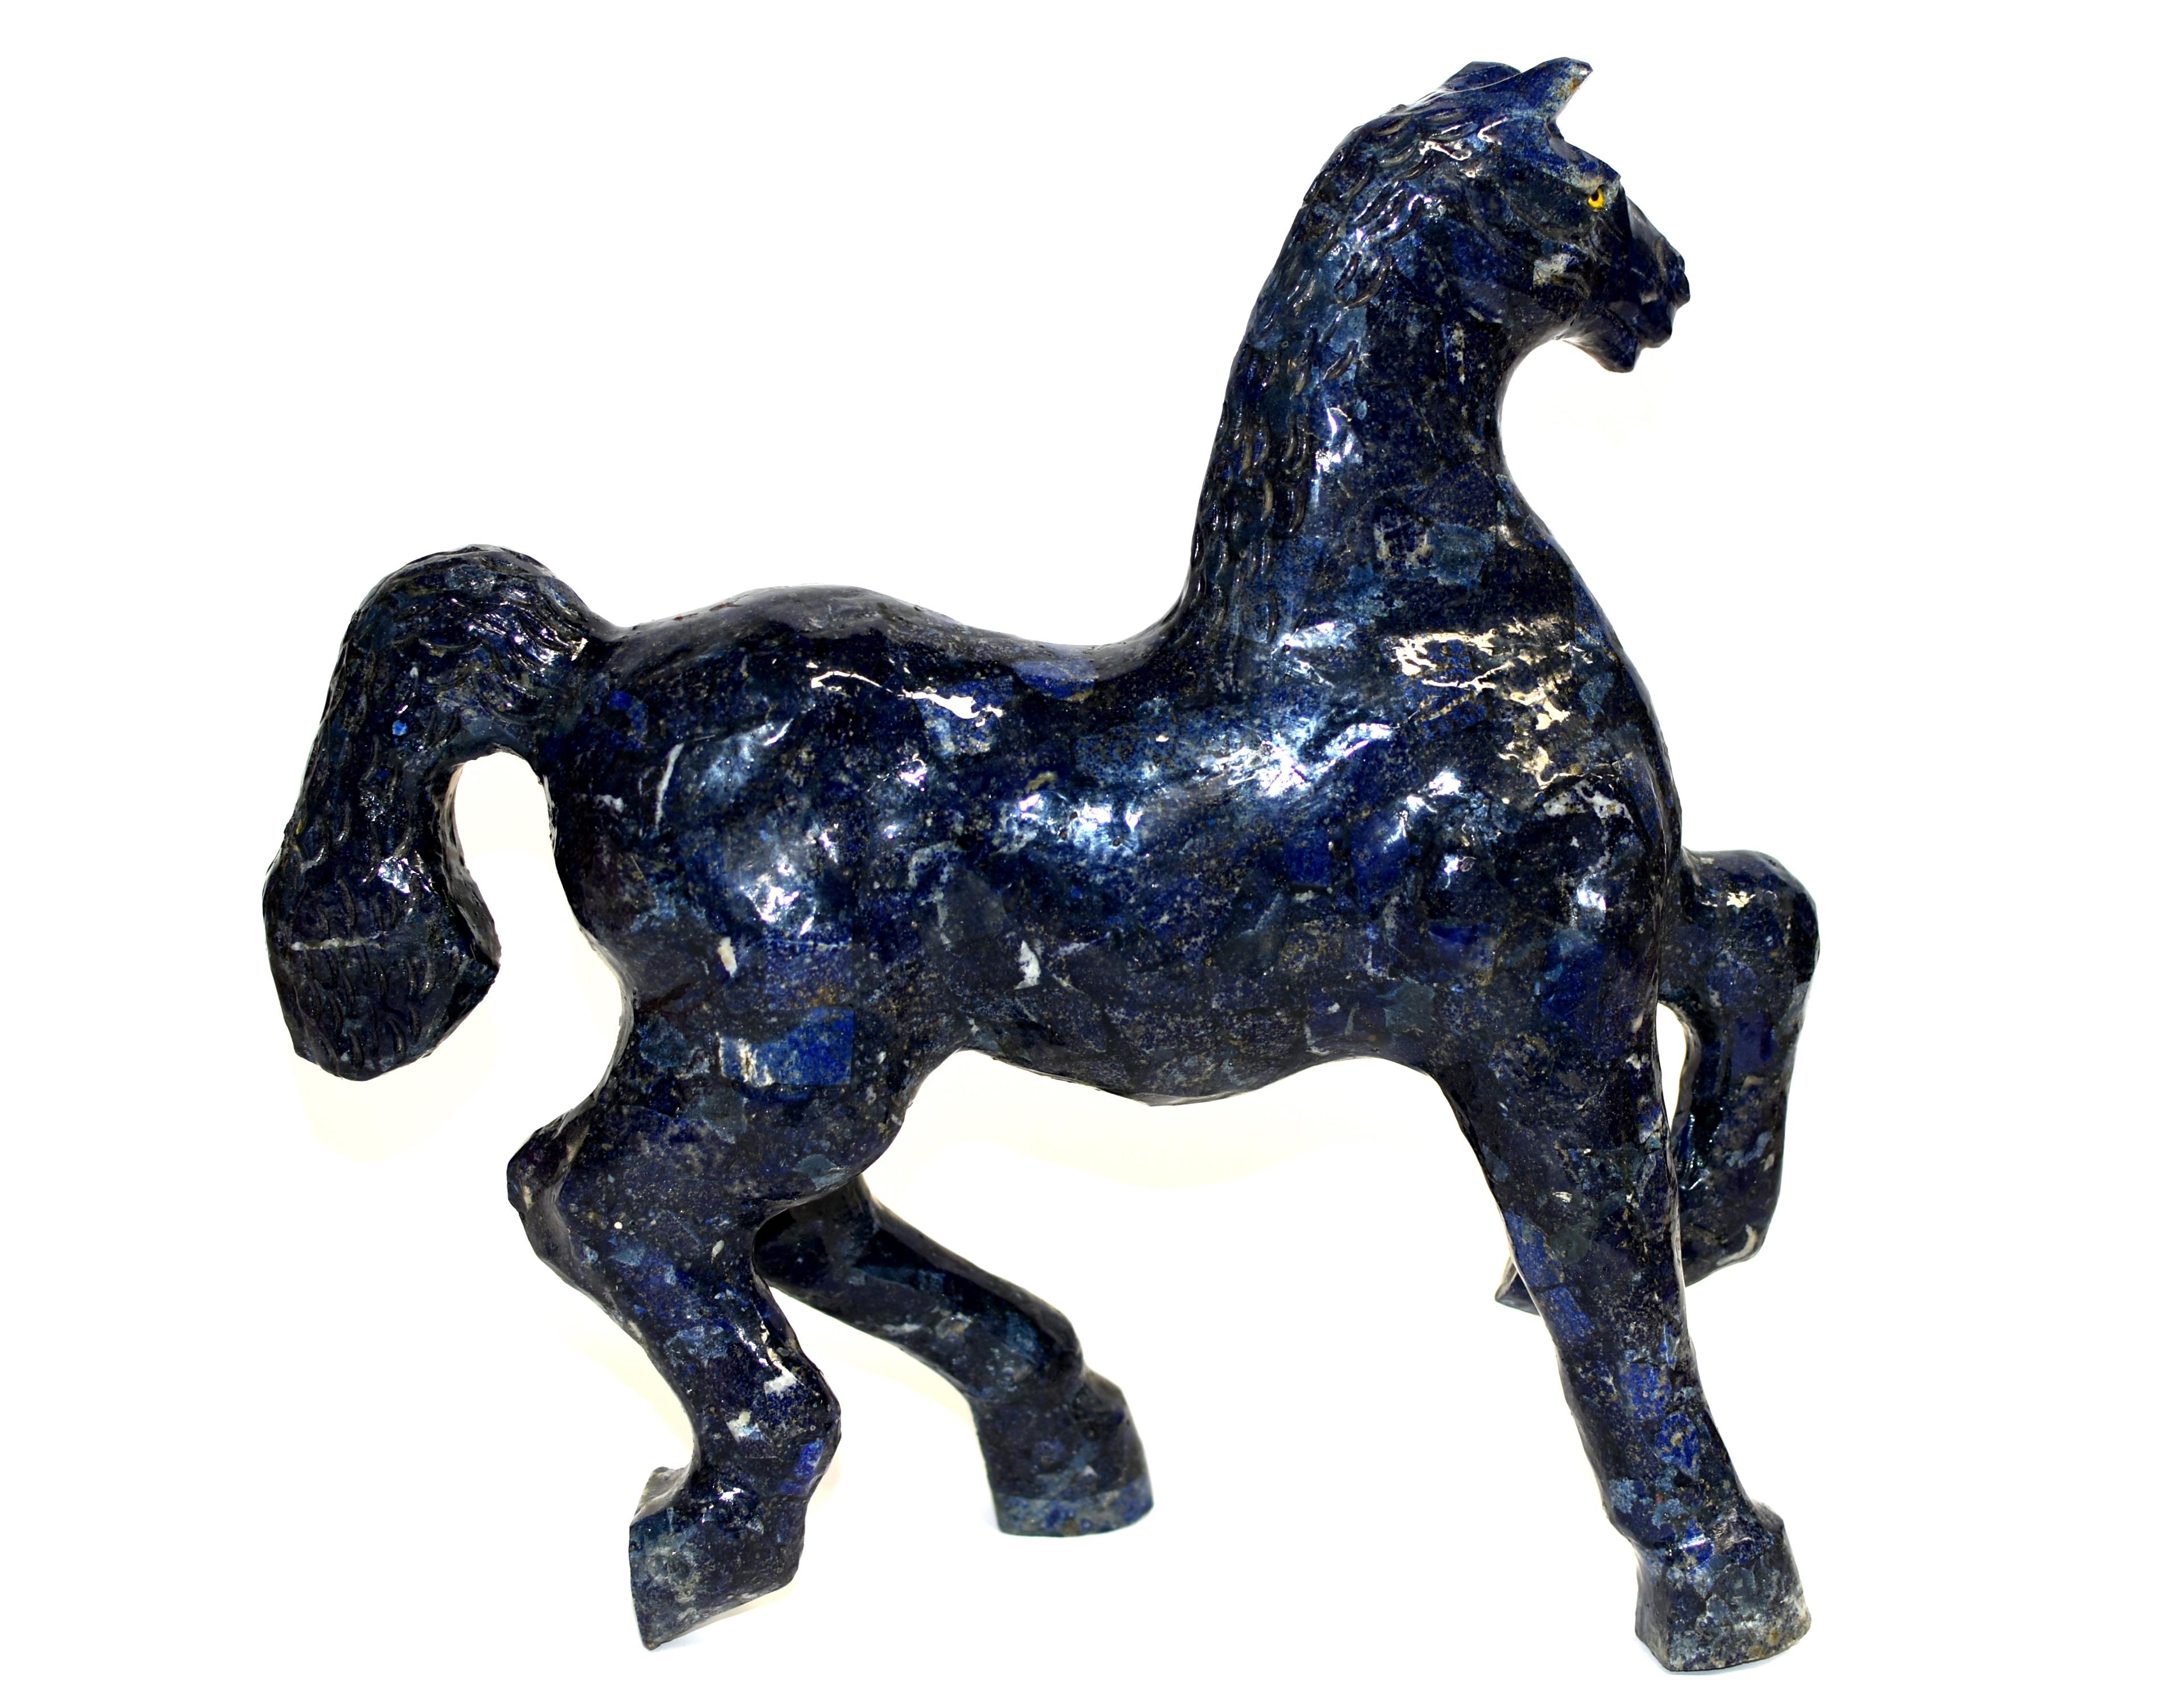 An extraordinary, 11 lb hand crafted lapis lazuli horse. The horse is modelled in gallop with the left leg lifted in a prancing pose and the right rear leg following, the sculpted head looking out to its left, and eyes alert with intense emotions.